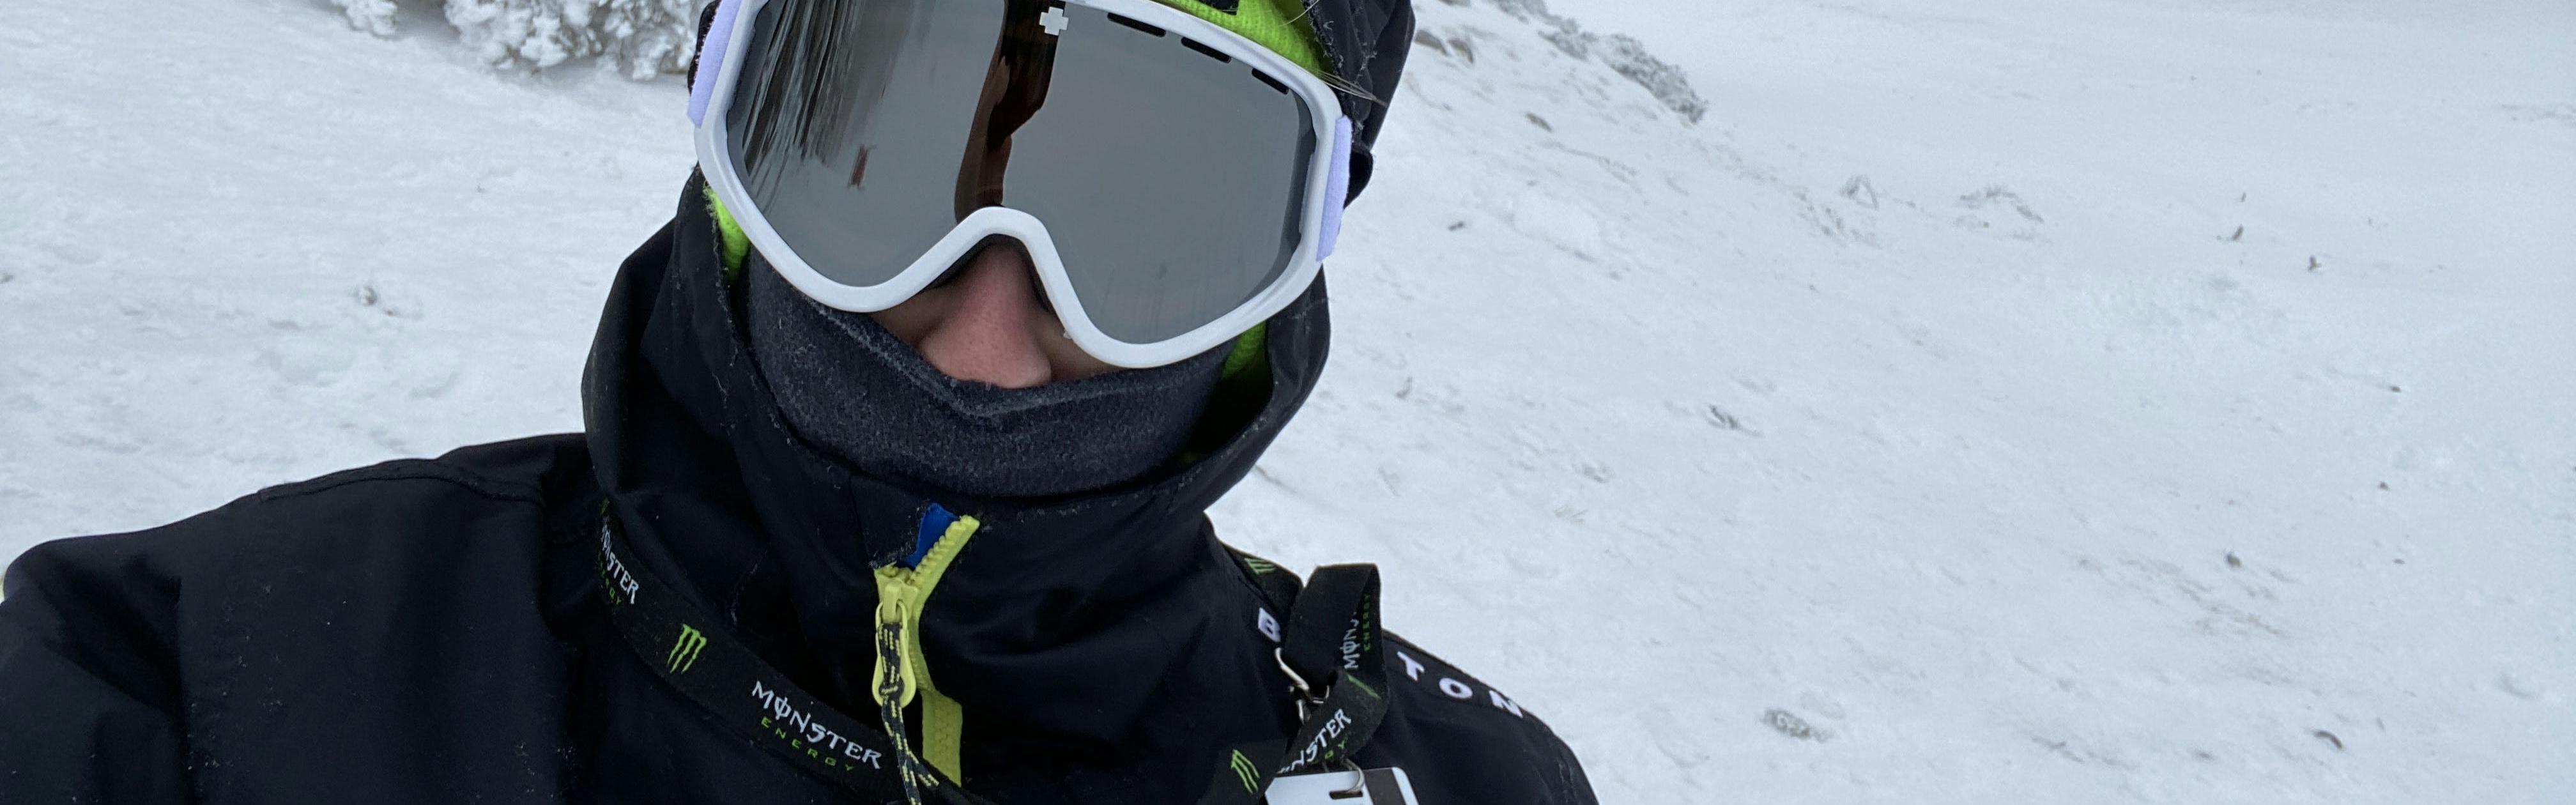 A snowboarder in the Burton Men's Covert Jacket.